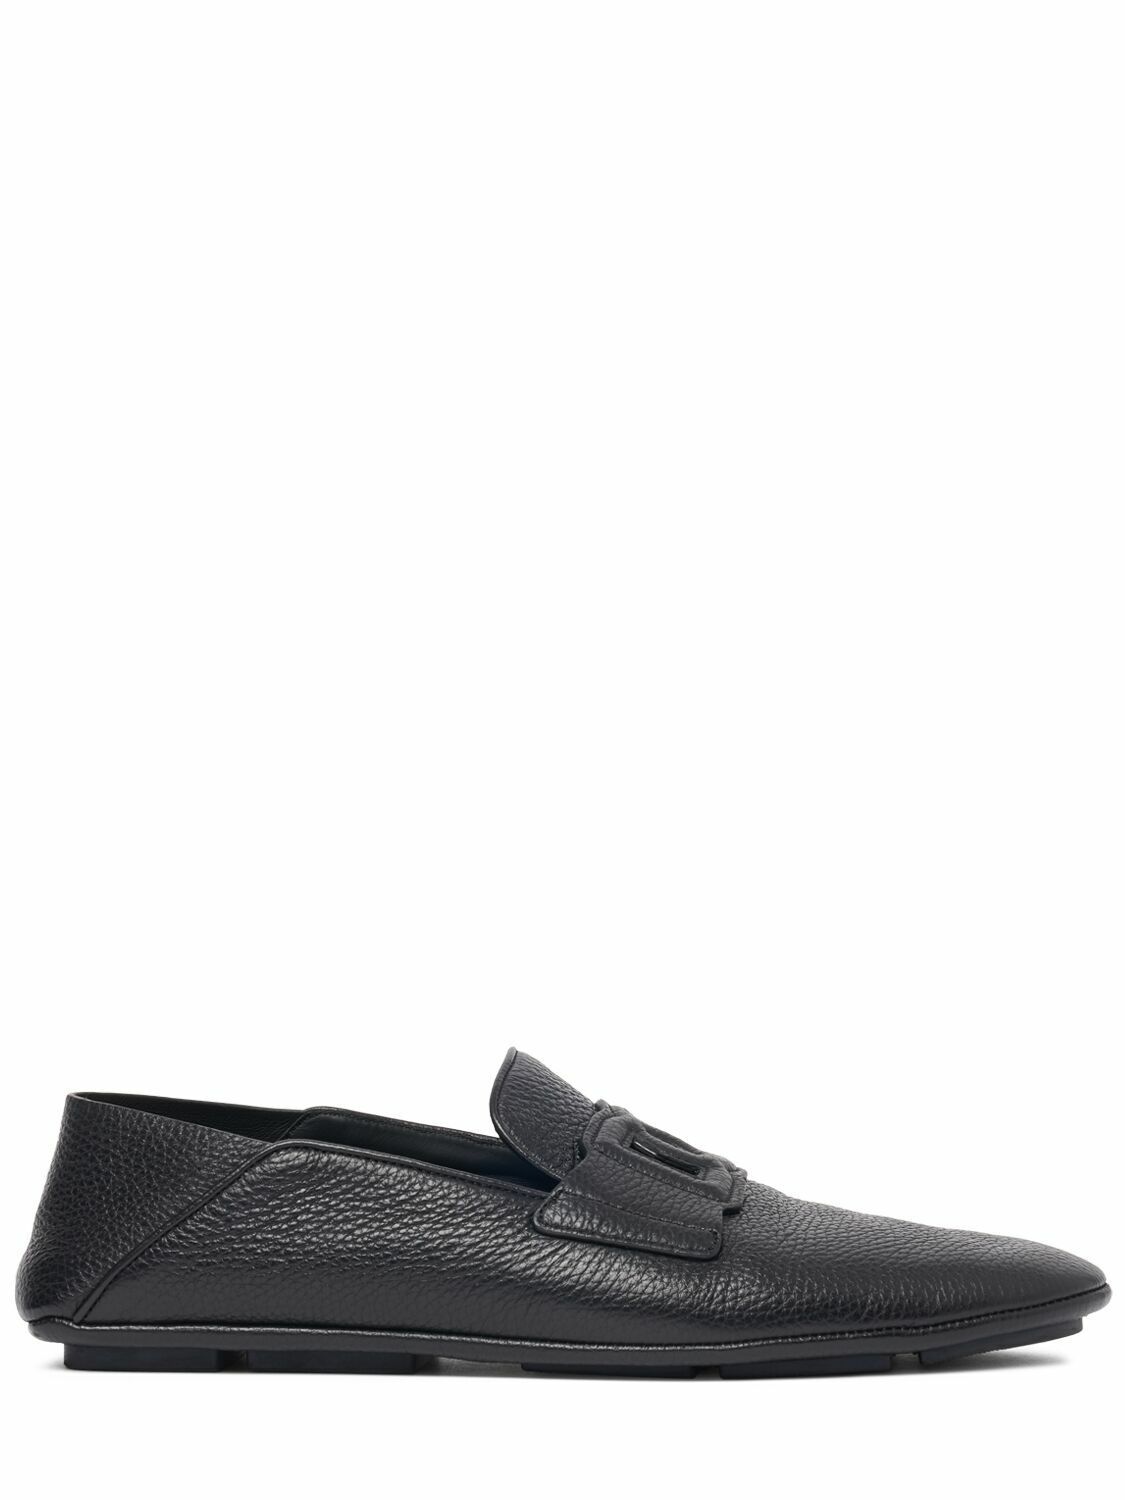 Photo: DOLCE & GABBANA Dg Driver Leather Loafer